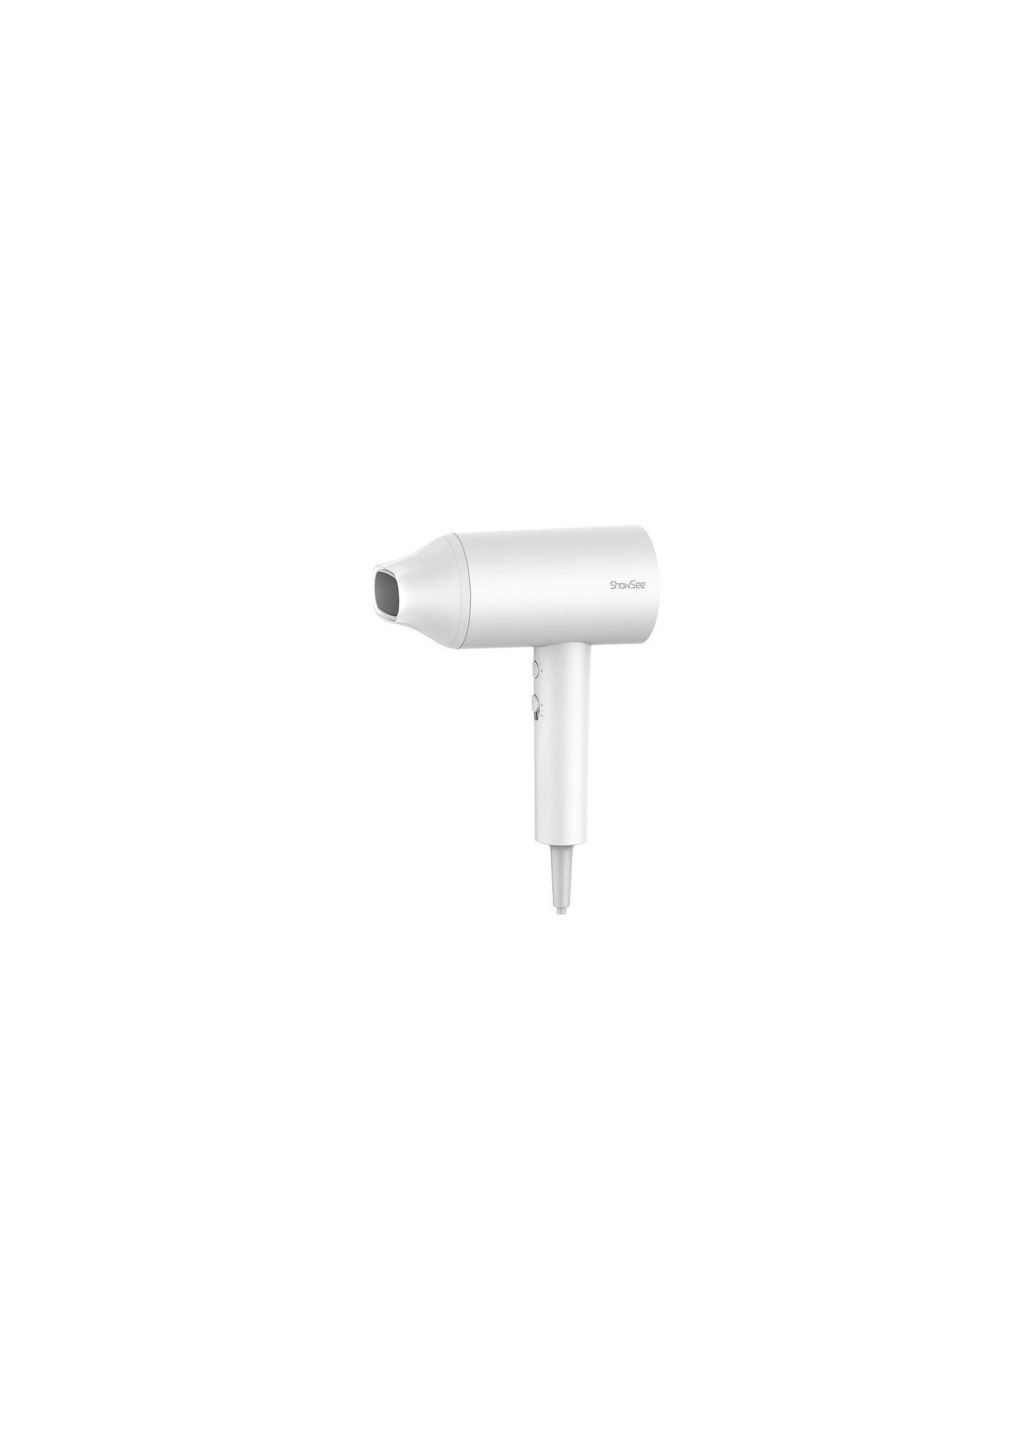 Фен ShowSee A1W White Xiaomi showsee a1-w white (275076353)